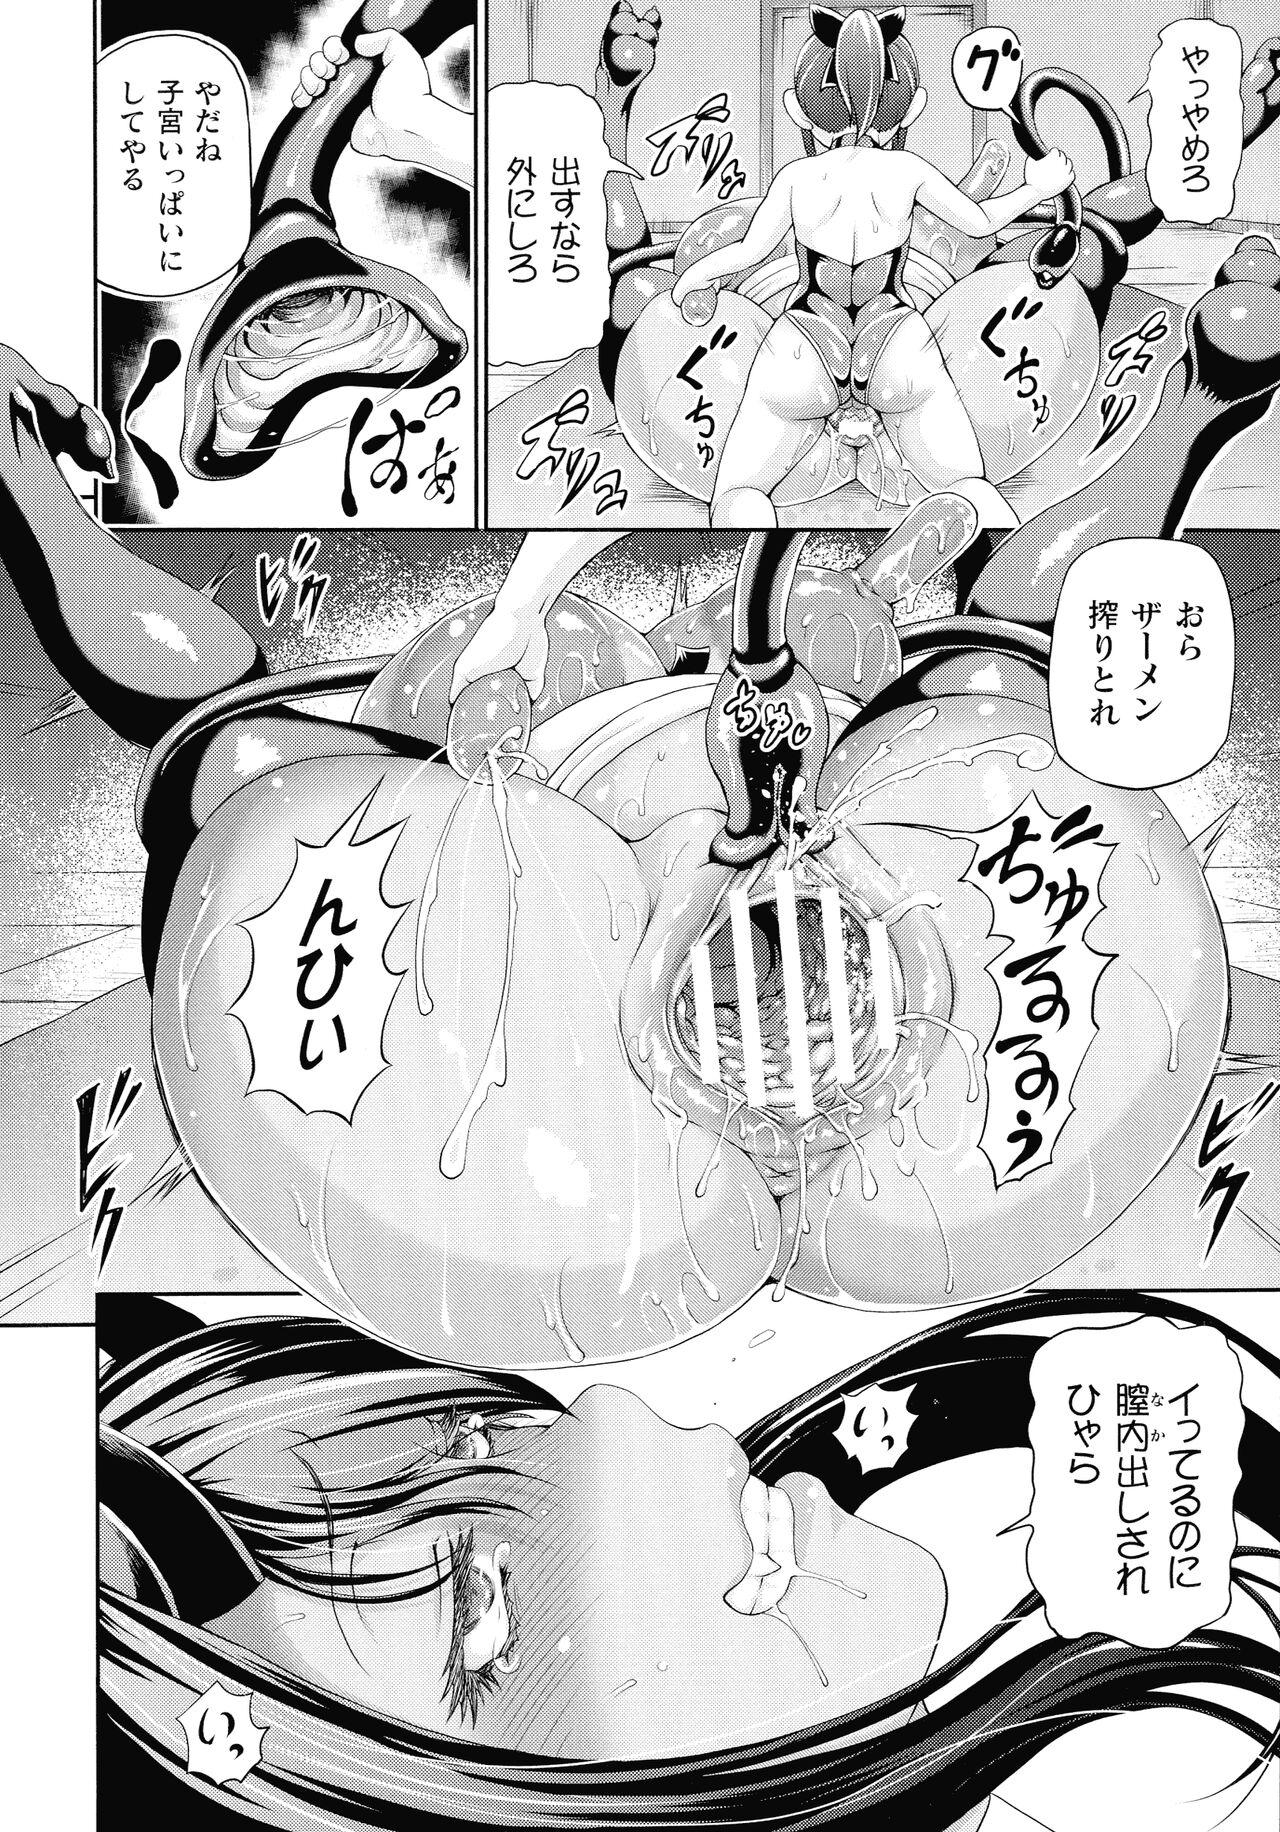 Isekai Shoukan 3 - Brothel in Another World 35